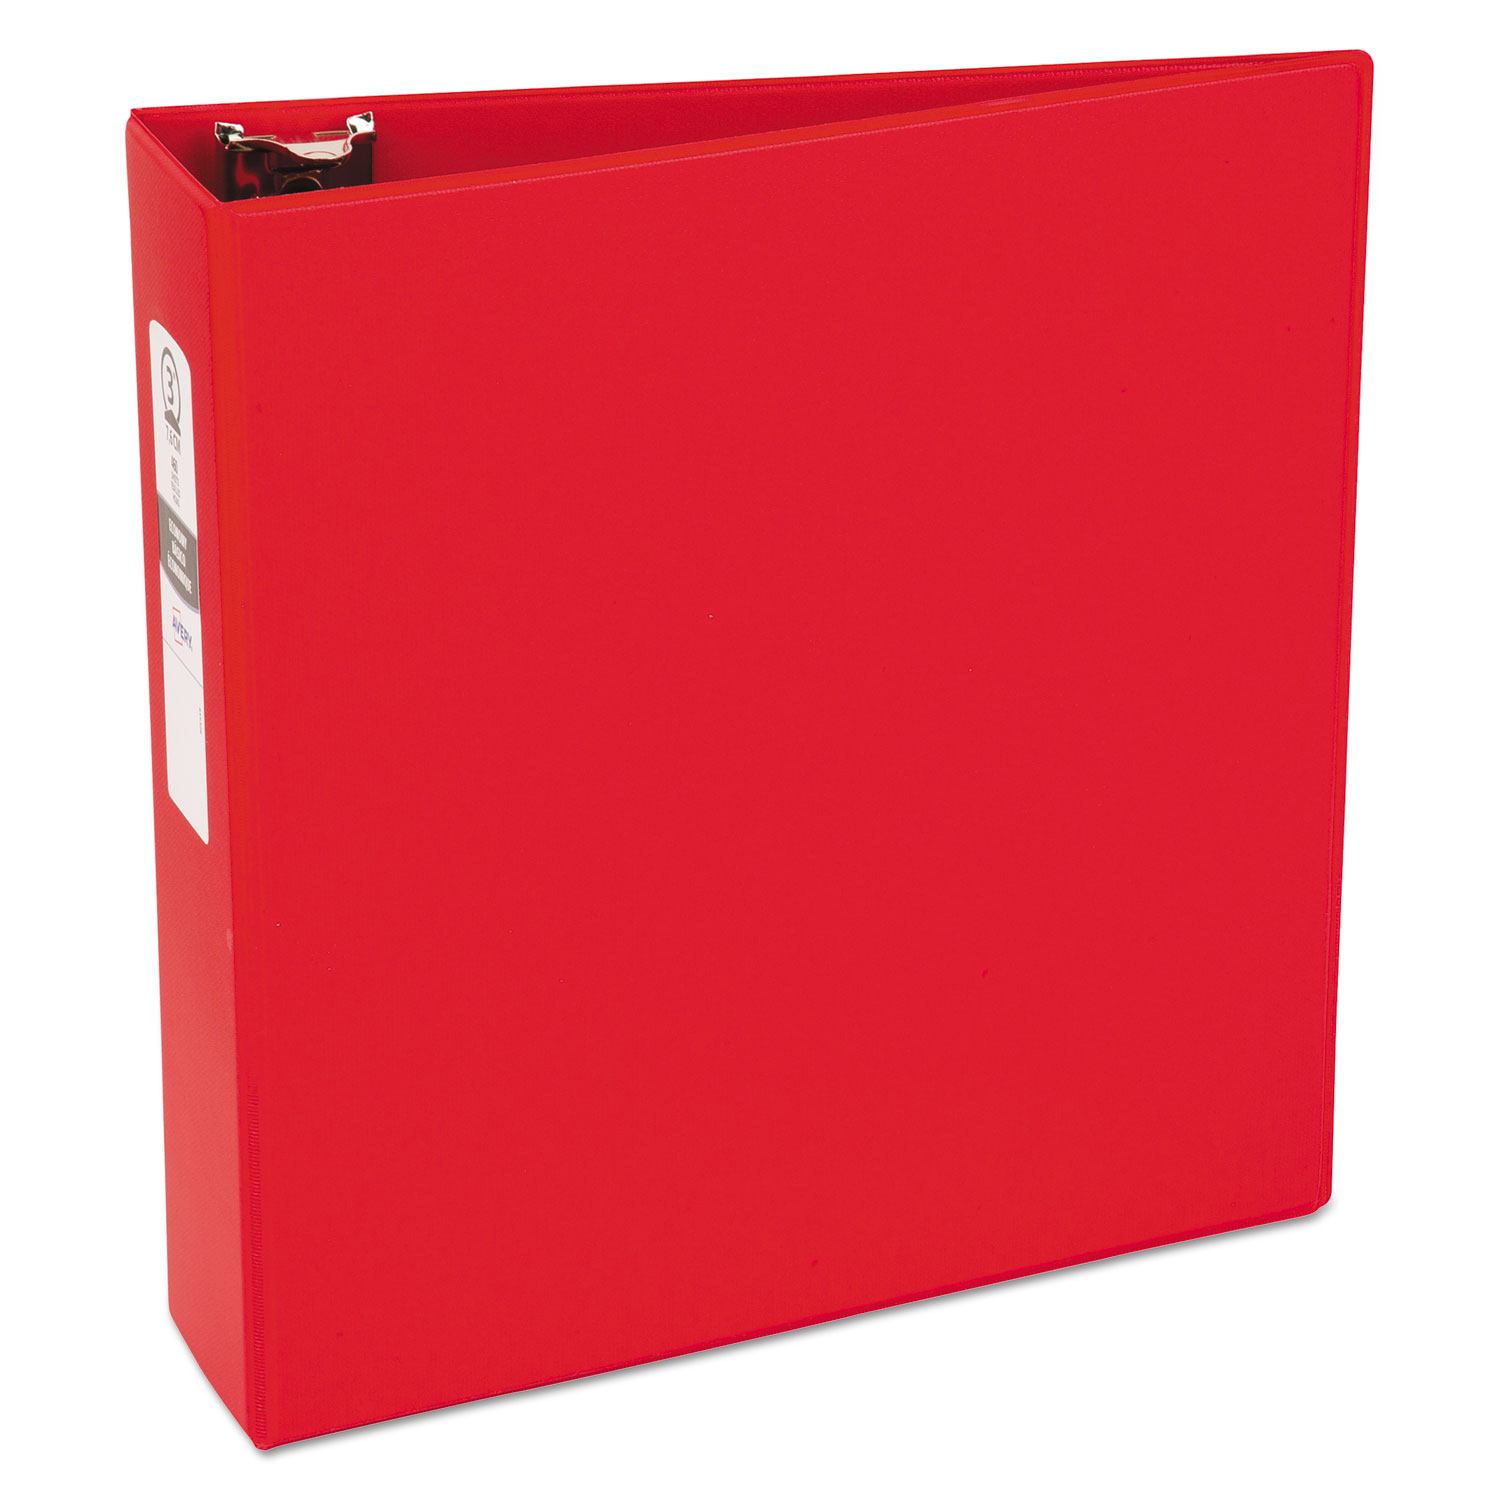  Avery 03608 Economy Non-View Binder with Round Rings, 3 Rings, 3 Capacity, 11 x 8.5, Red (AVE03608) 